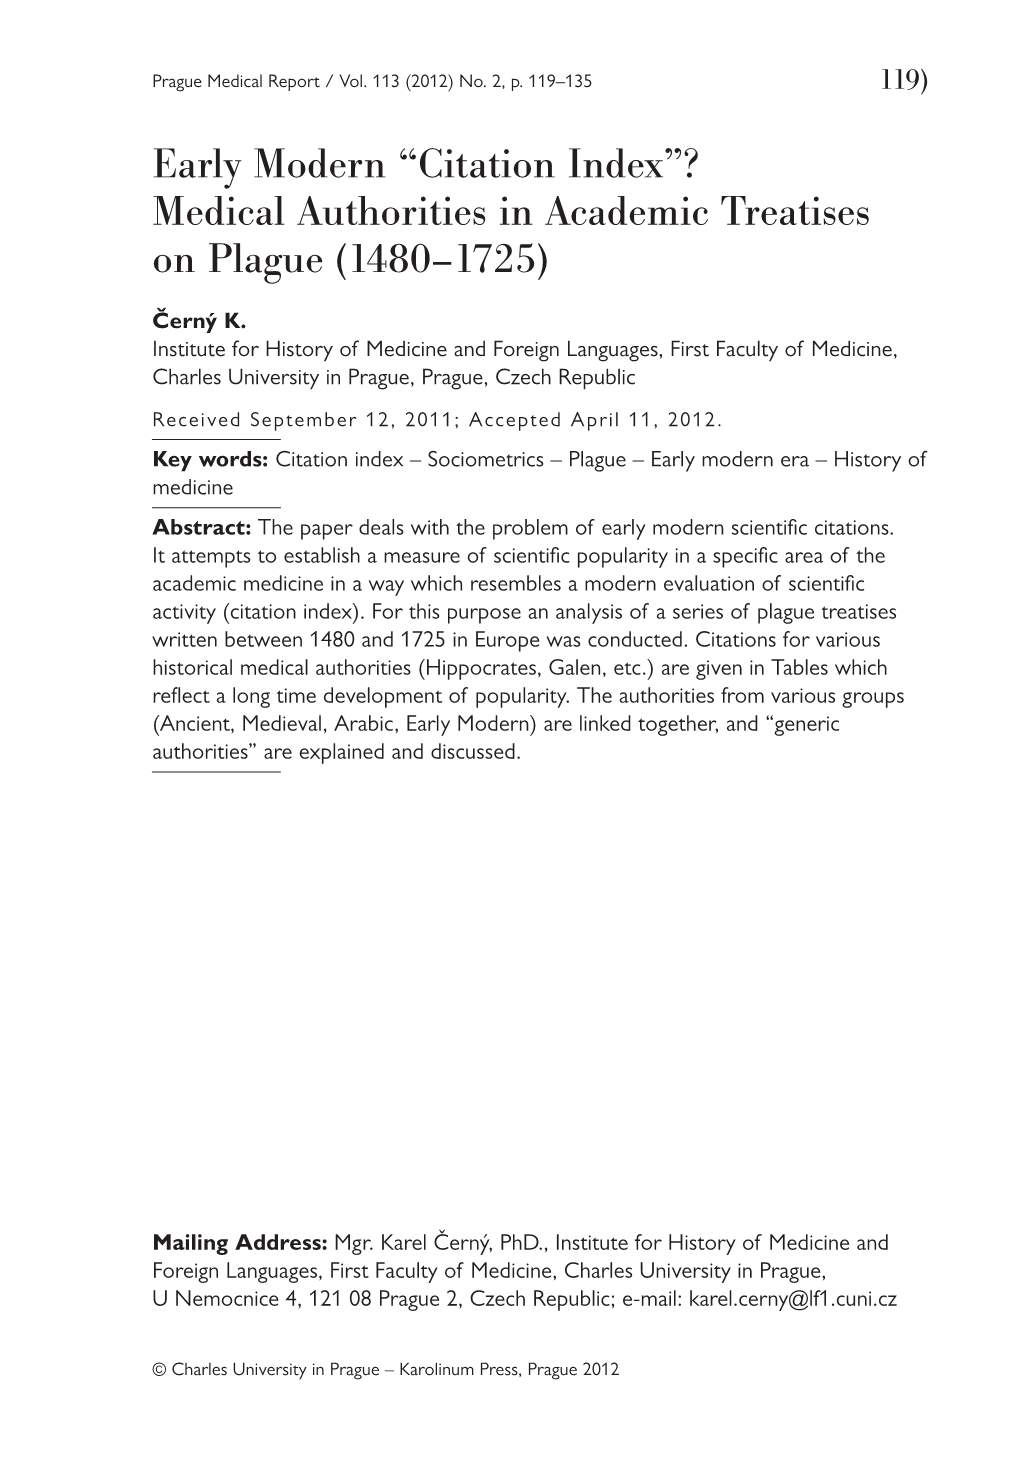 Early Modern “Citation Index”? Medical Authorities in Academic Treatises on Plague (1480–1725)